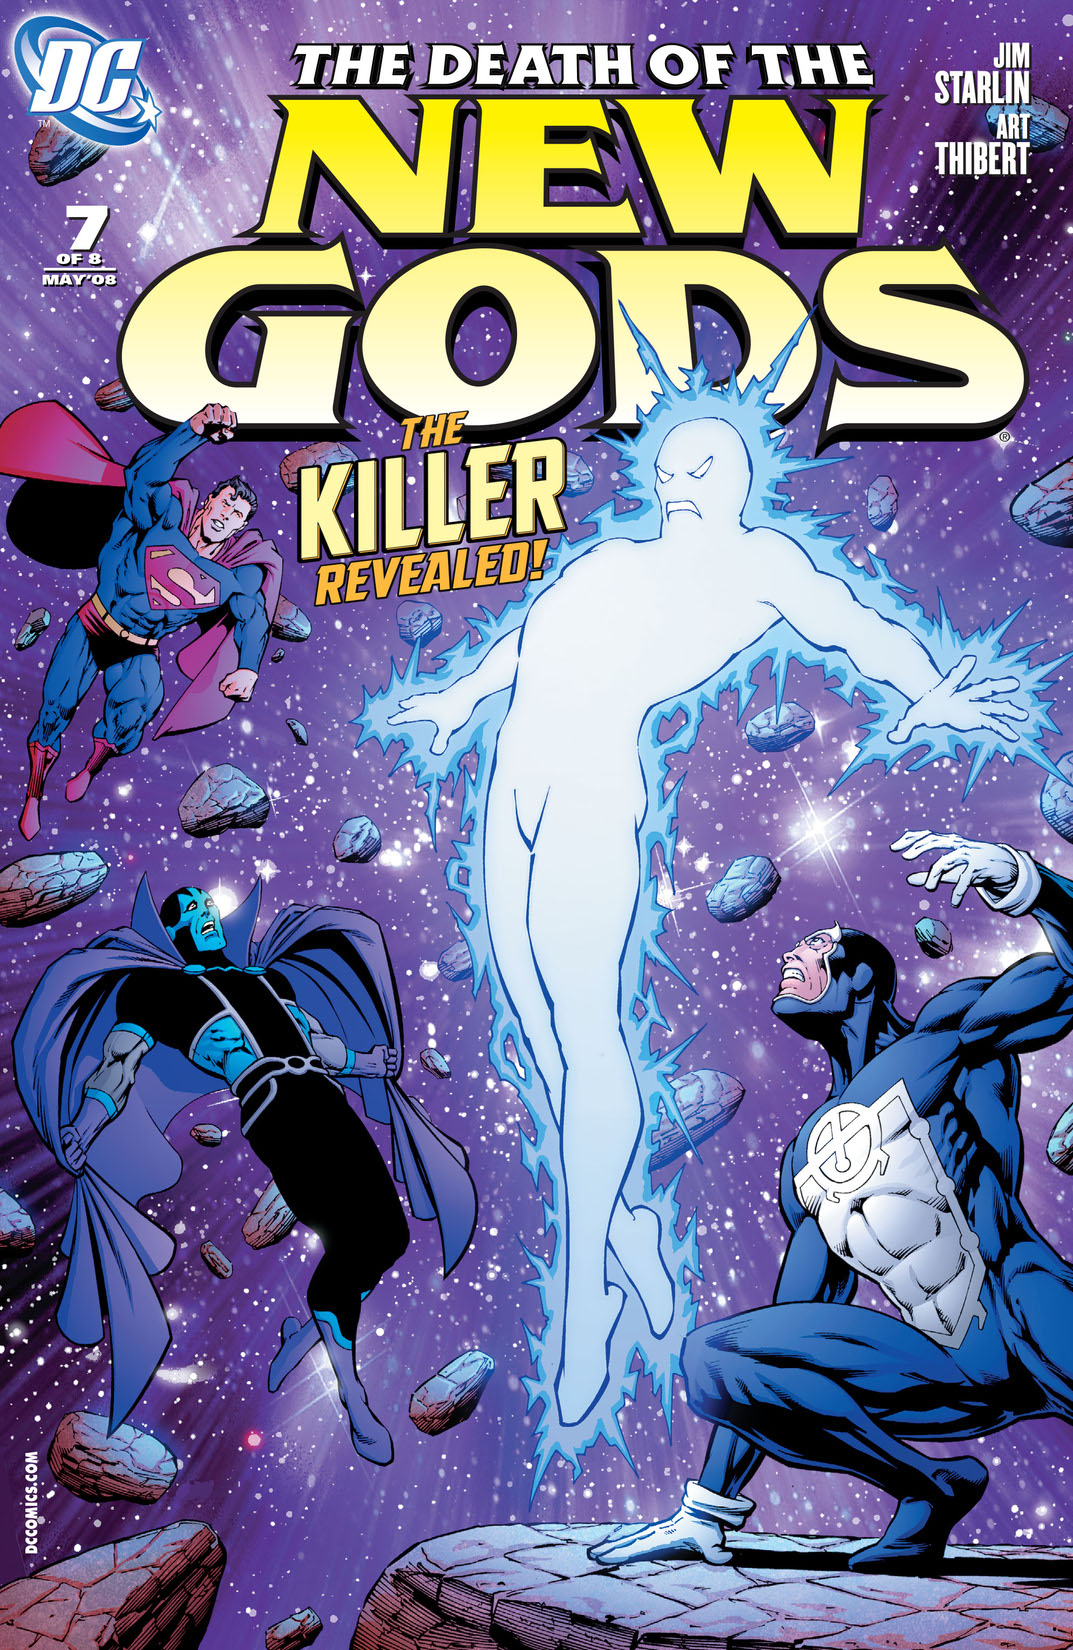 Death of the New Gods #7 preview images